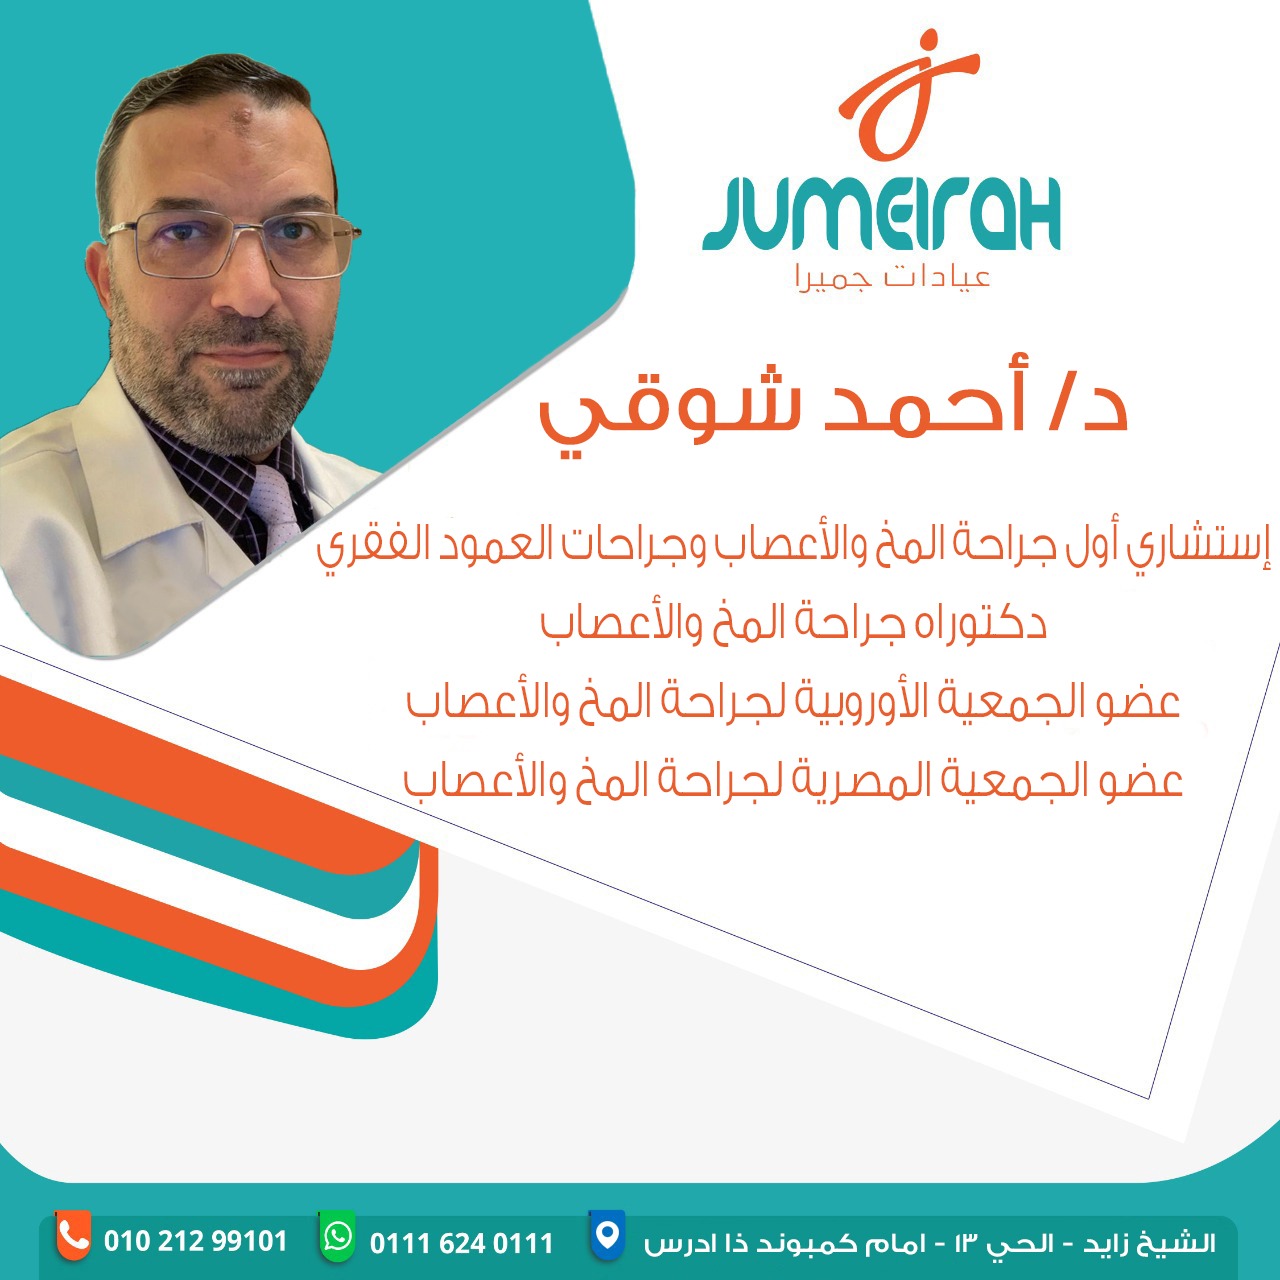 Dr. Ahmed Shawky